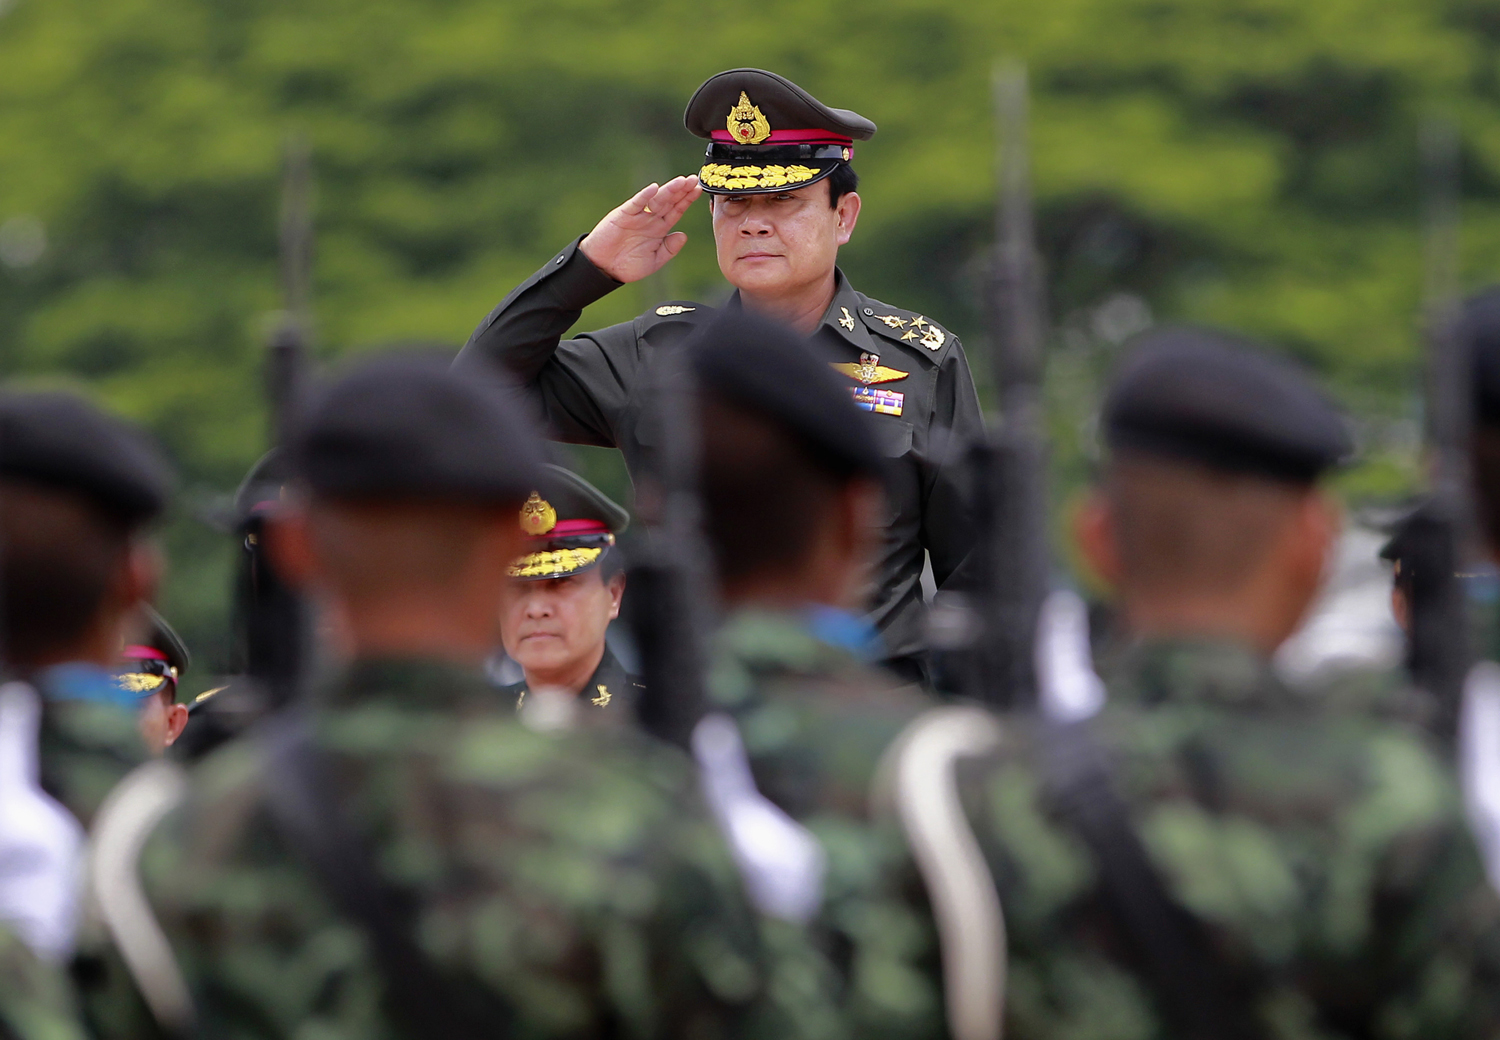 Thailand's newly appointed Prime Minister Chan-ocha reviews honor guards during his visit at the 2nd Infantry Battalion, 21st Infantry Regiment, Queen's Guard in Chonburi province, on the outskirts of Bangkok